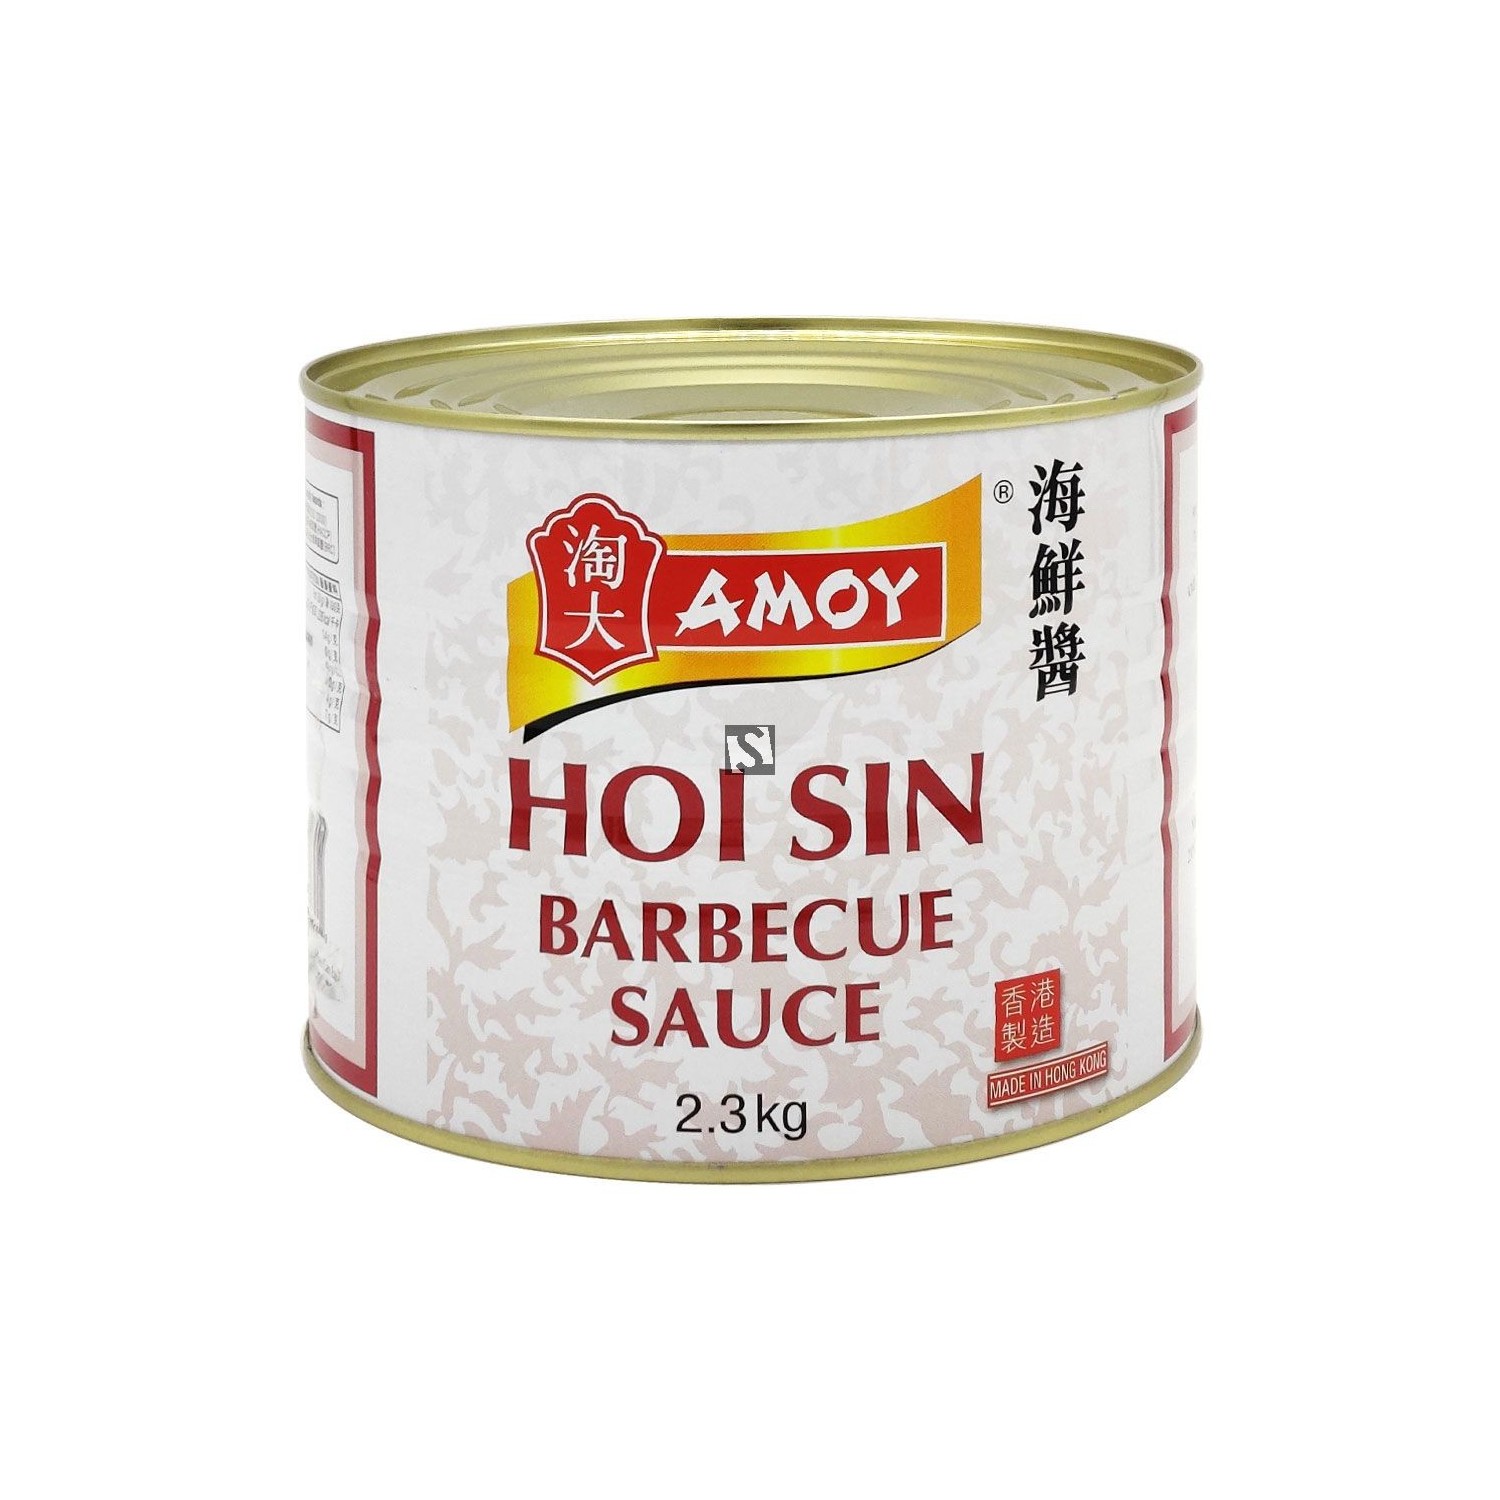 Amoy Hoi Sin Barbecue Sauce 2.3kg BBQ Catering Tin Chinese Hoi Sin